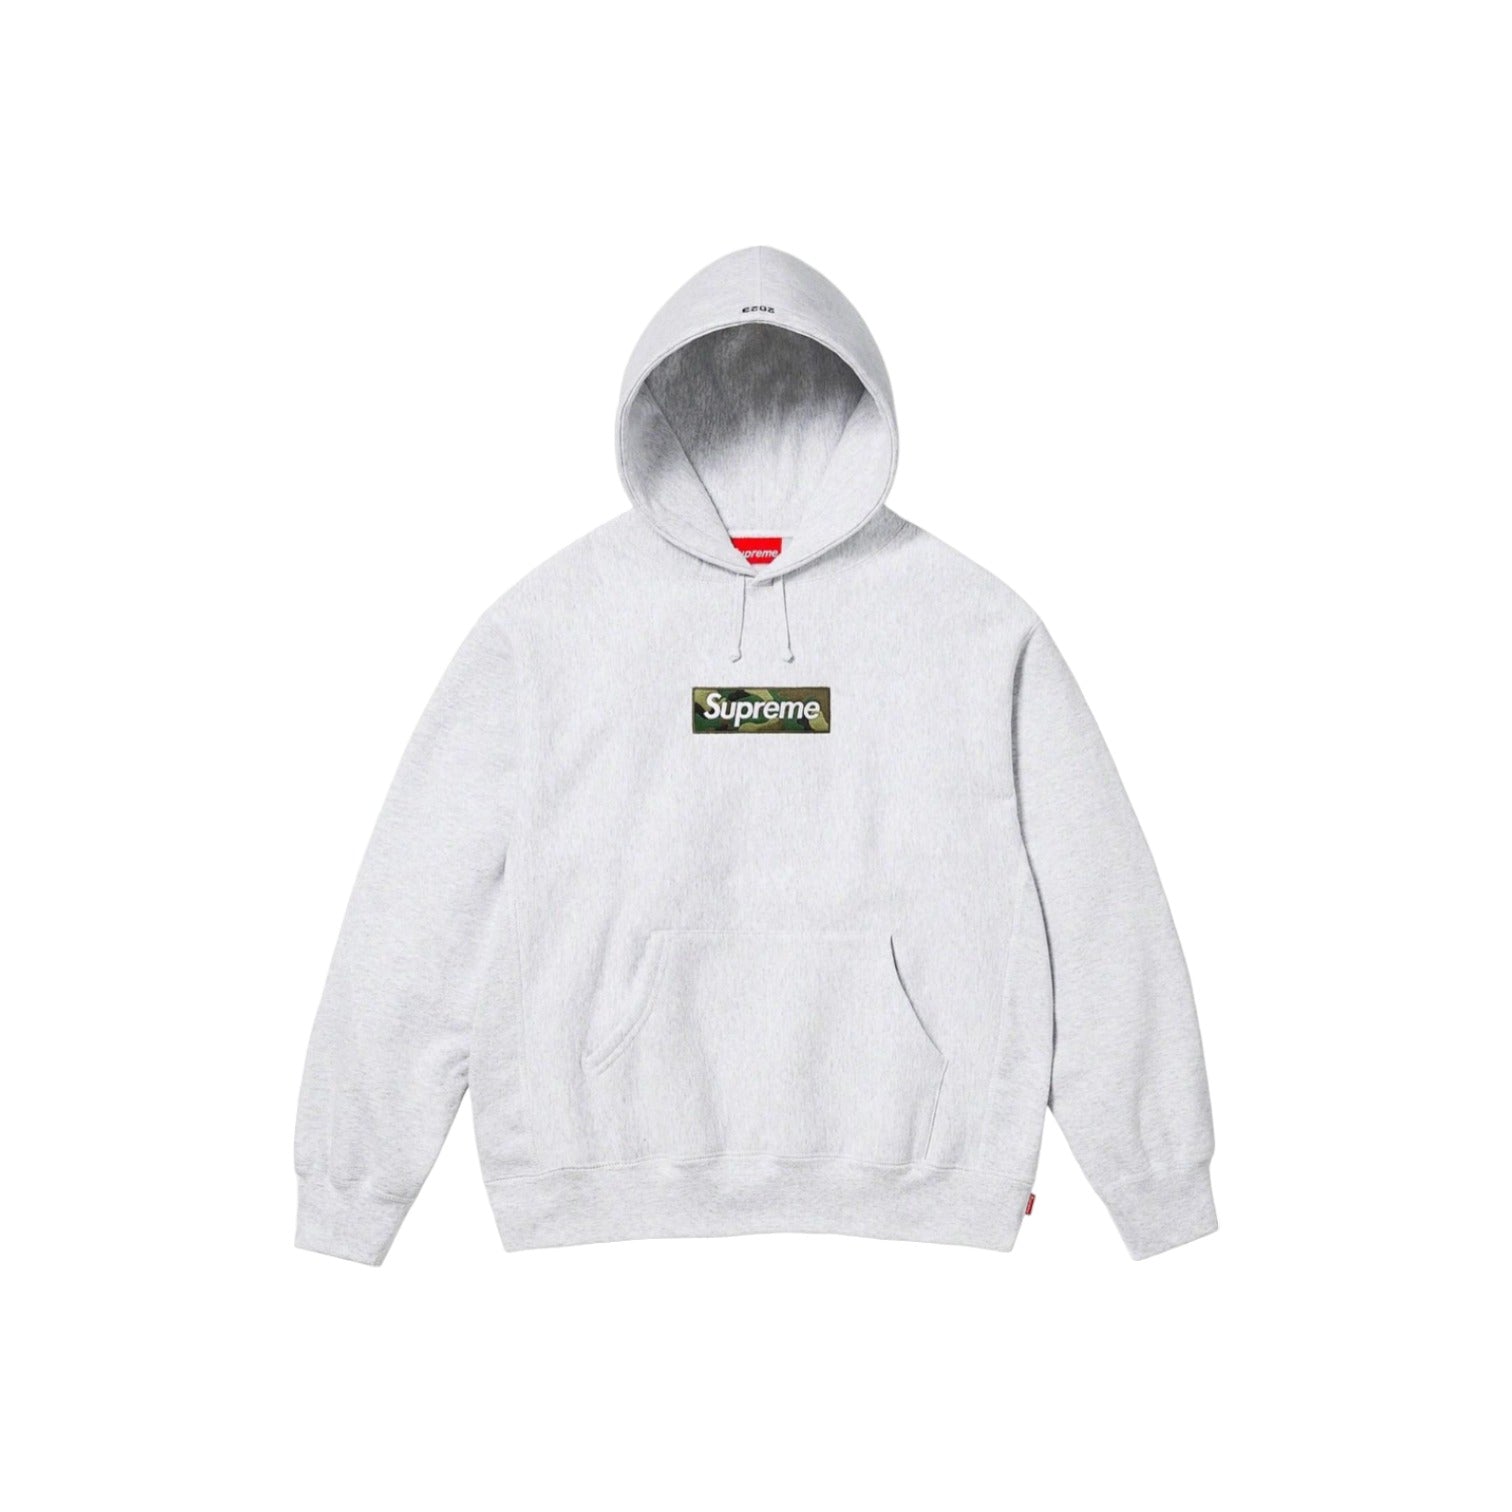 Supreme Box Logo Crewneck. Size M. Available in Store and on